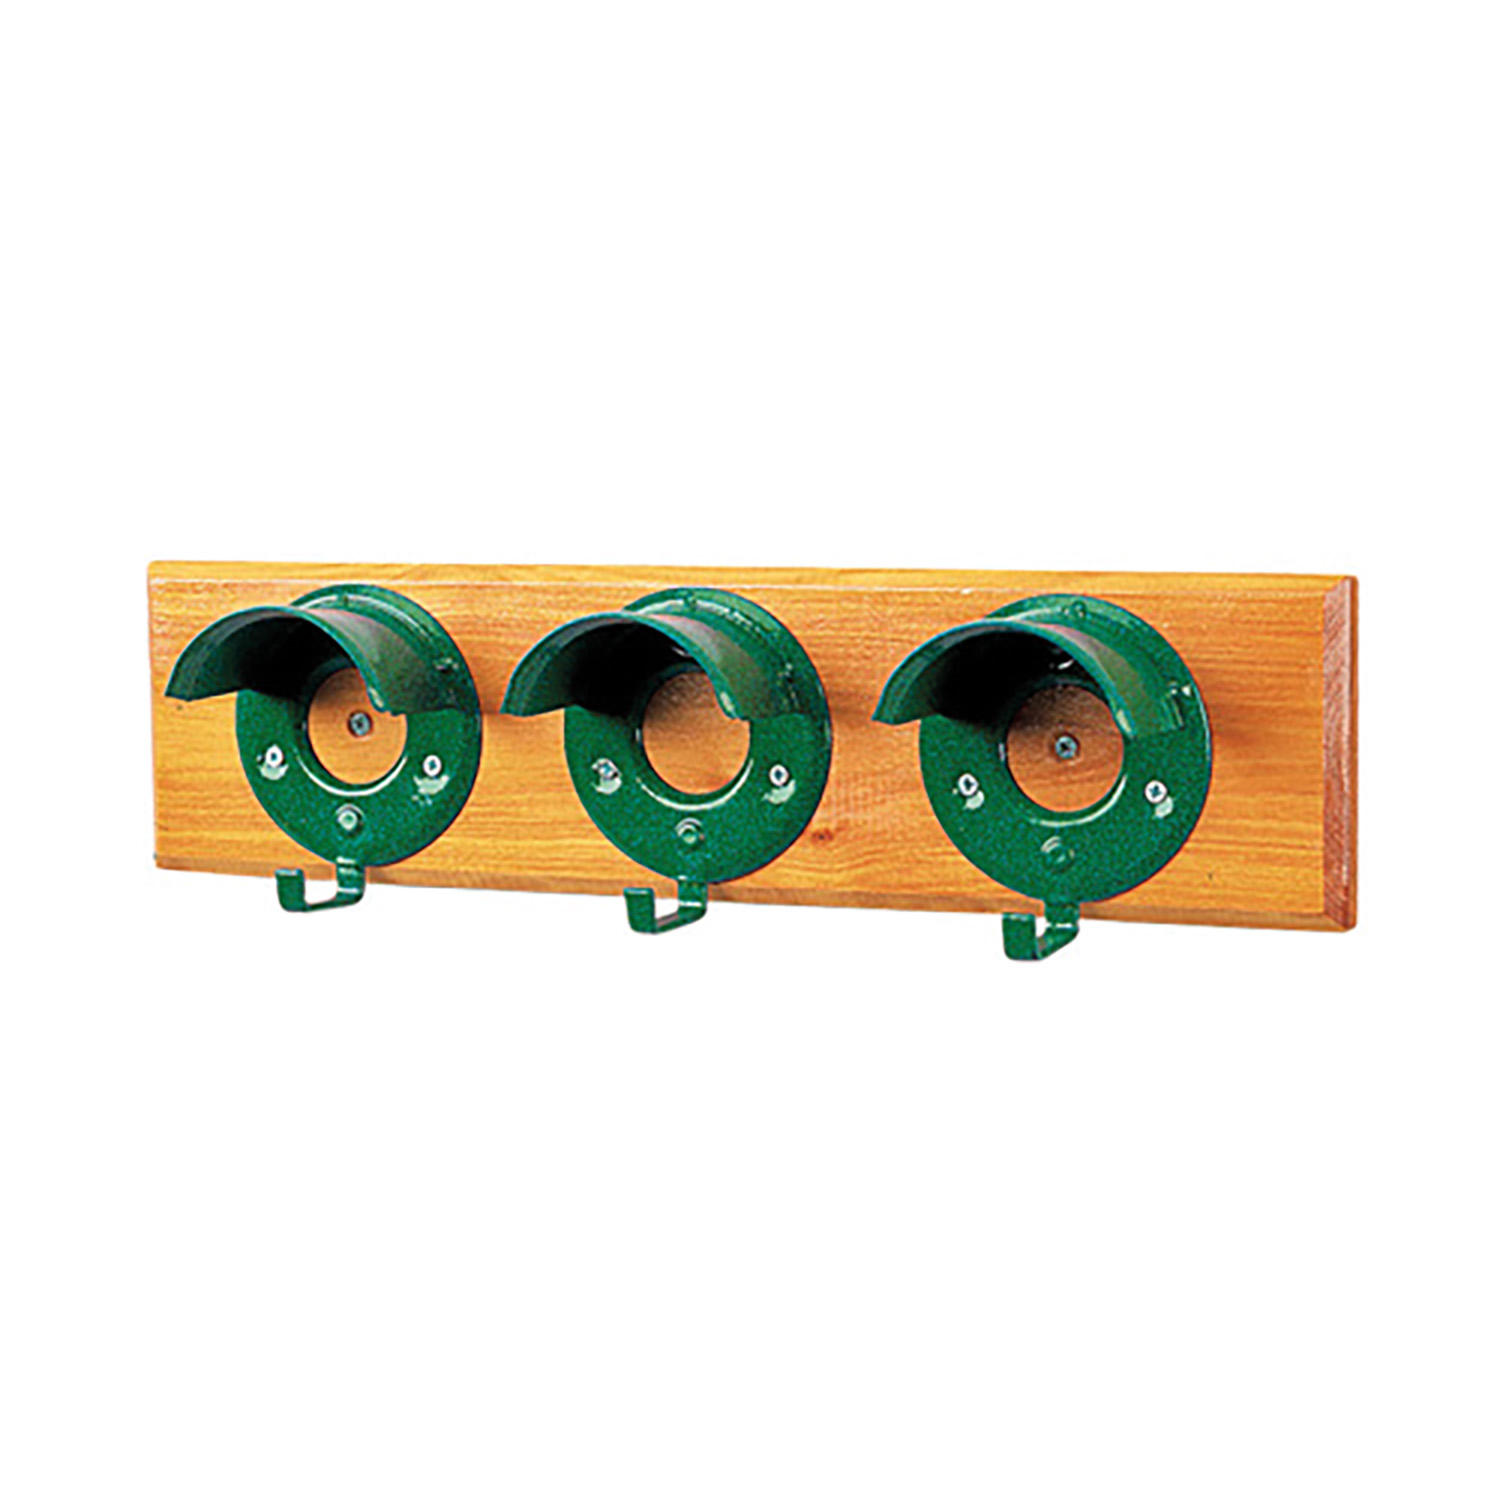 STUBBS BRIDLE RACK SET OF 3 ON BOARD S203 GREEN